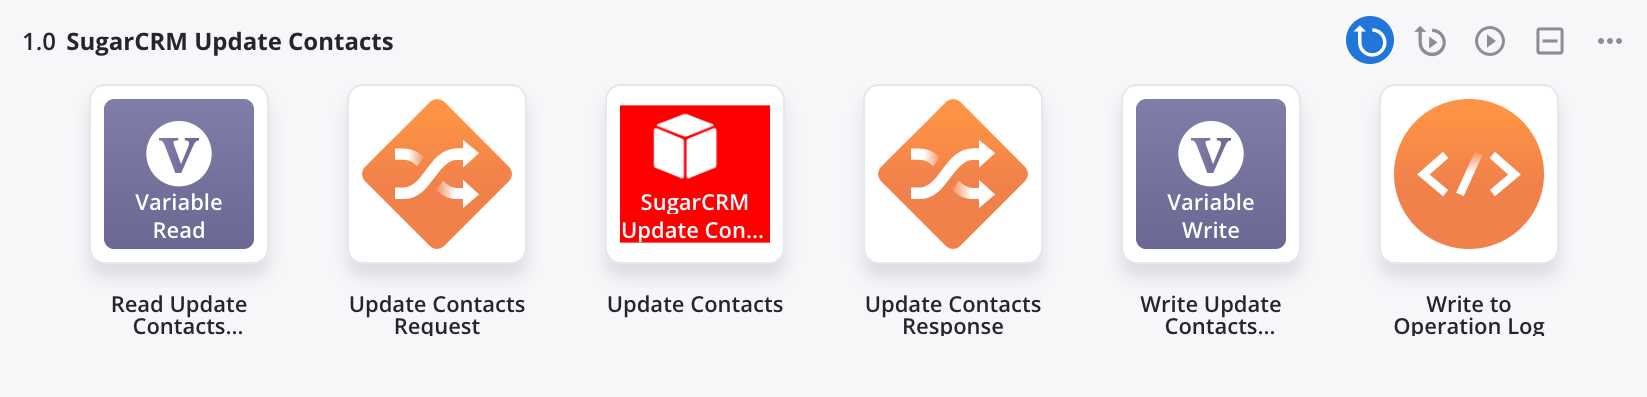 SugarCRM Update Contacts operation